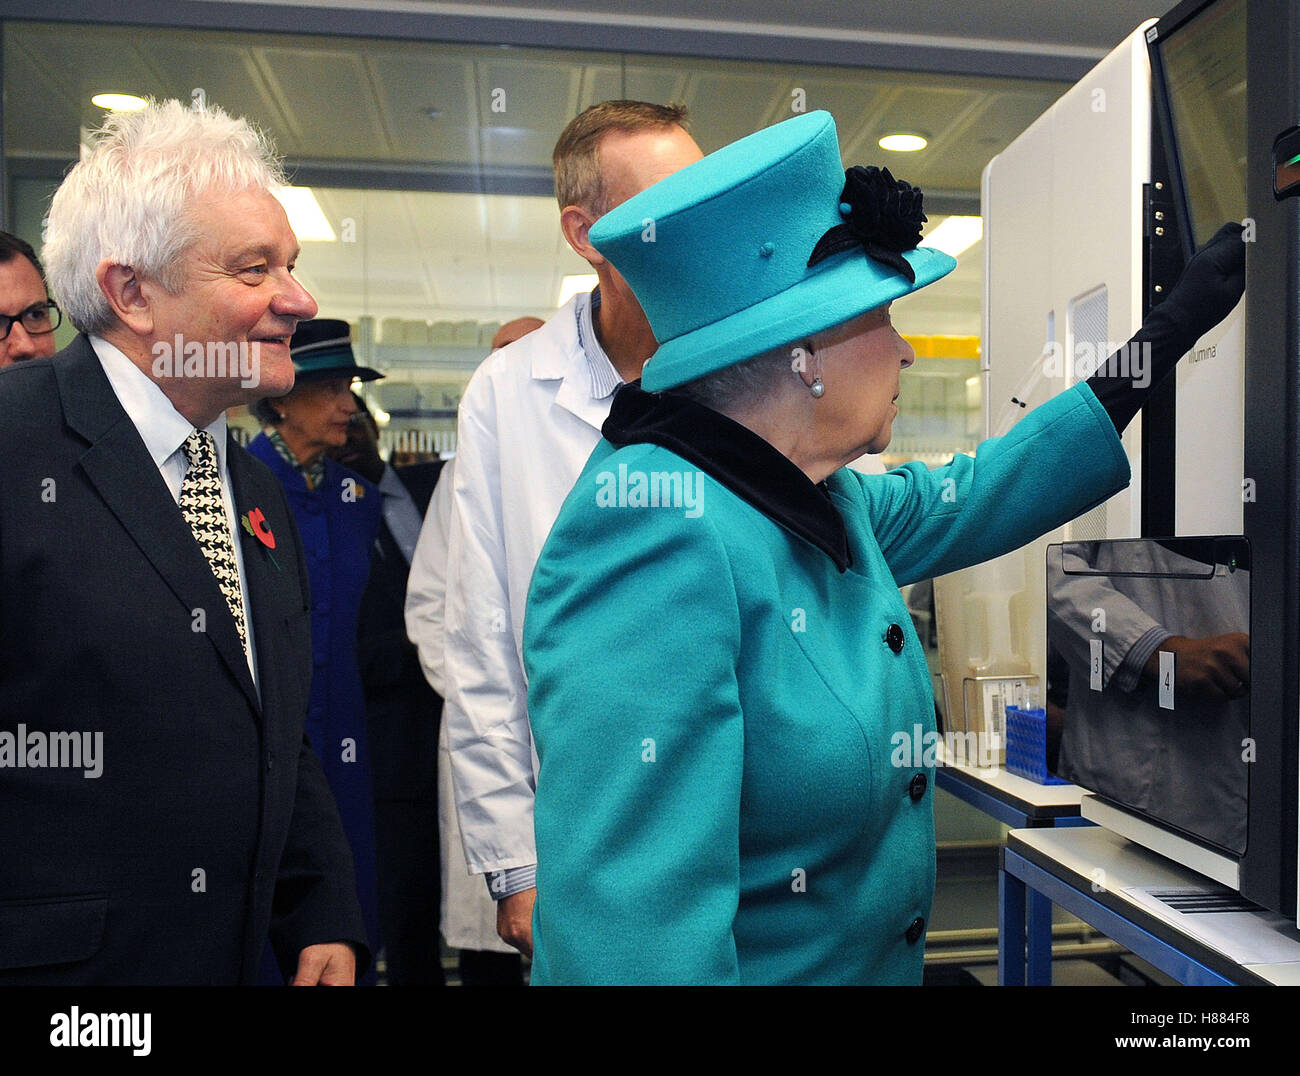 Sir Paul Nurse Director of the Francis Crick Institute watches as Queen Elizabeth II pushes a button to start sequencing Sir Paul's genome during a visit to officially open the Francis Crick Institute in central London. Stock Photo